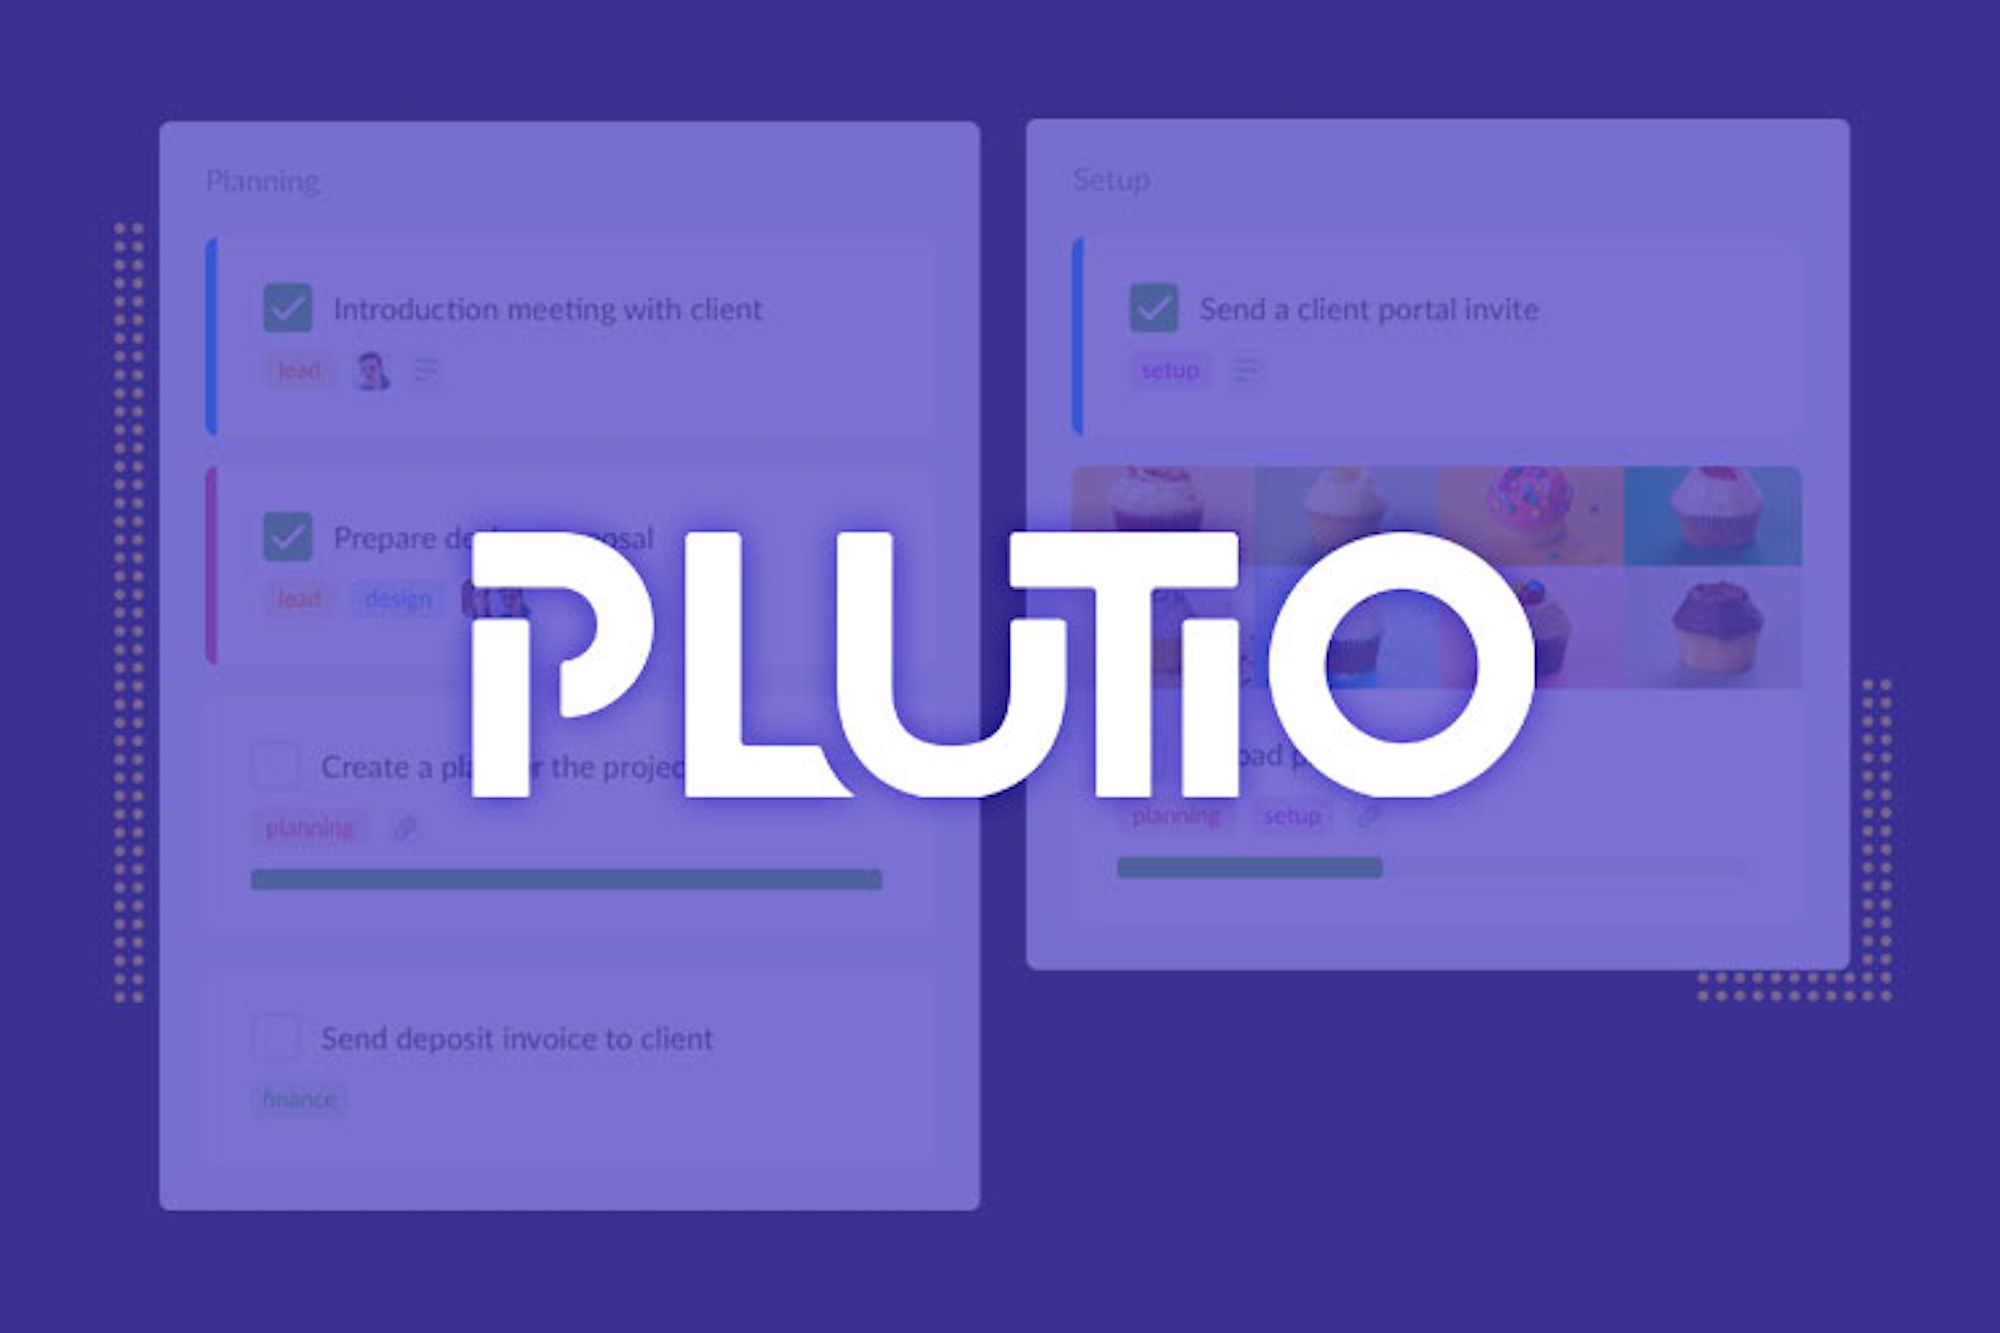 Plutio Helps Increase Productivity and Grow Your Business